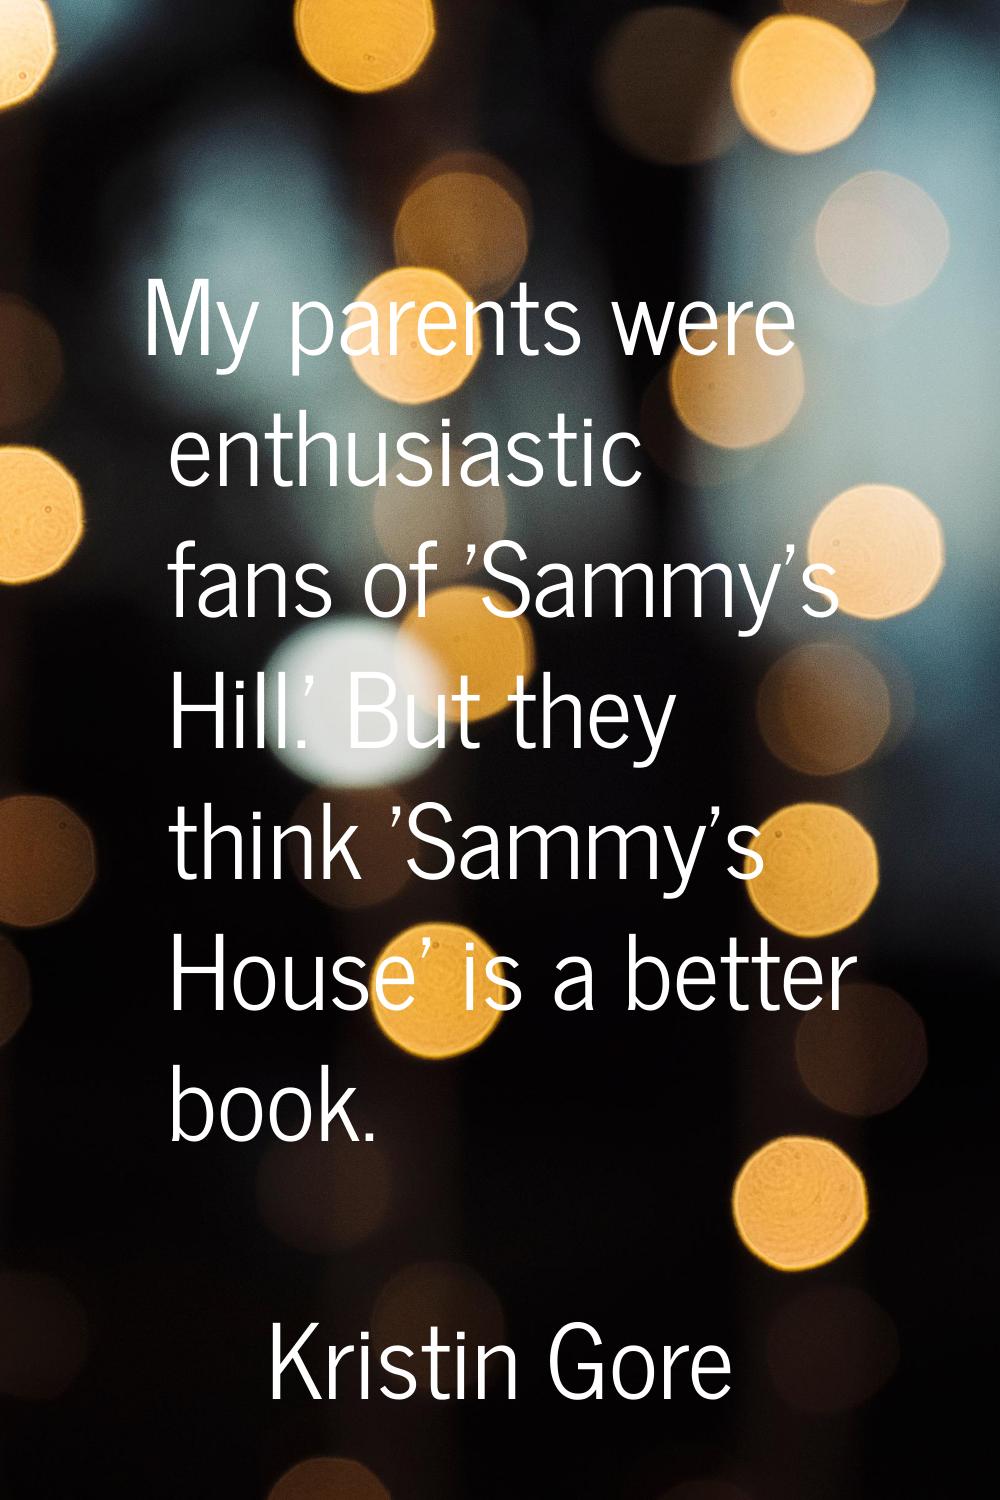 My parents were enthusiastic fans of 'Sammy's Hill.' But they think 'Sammy's House' is a better boo